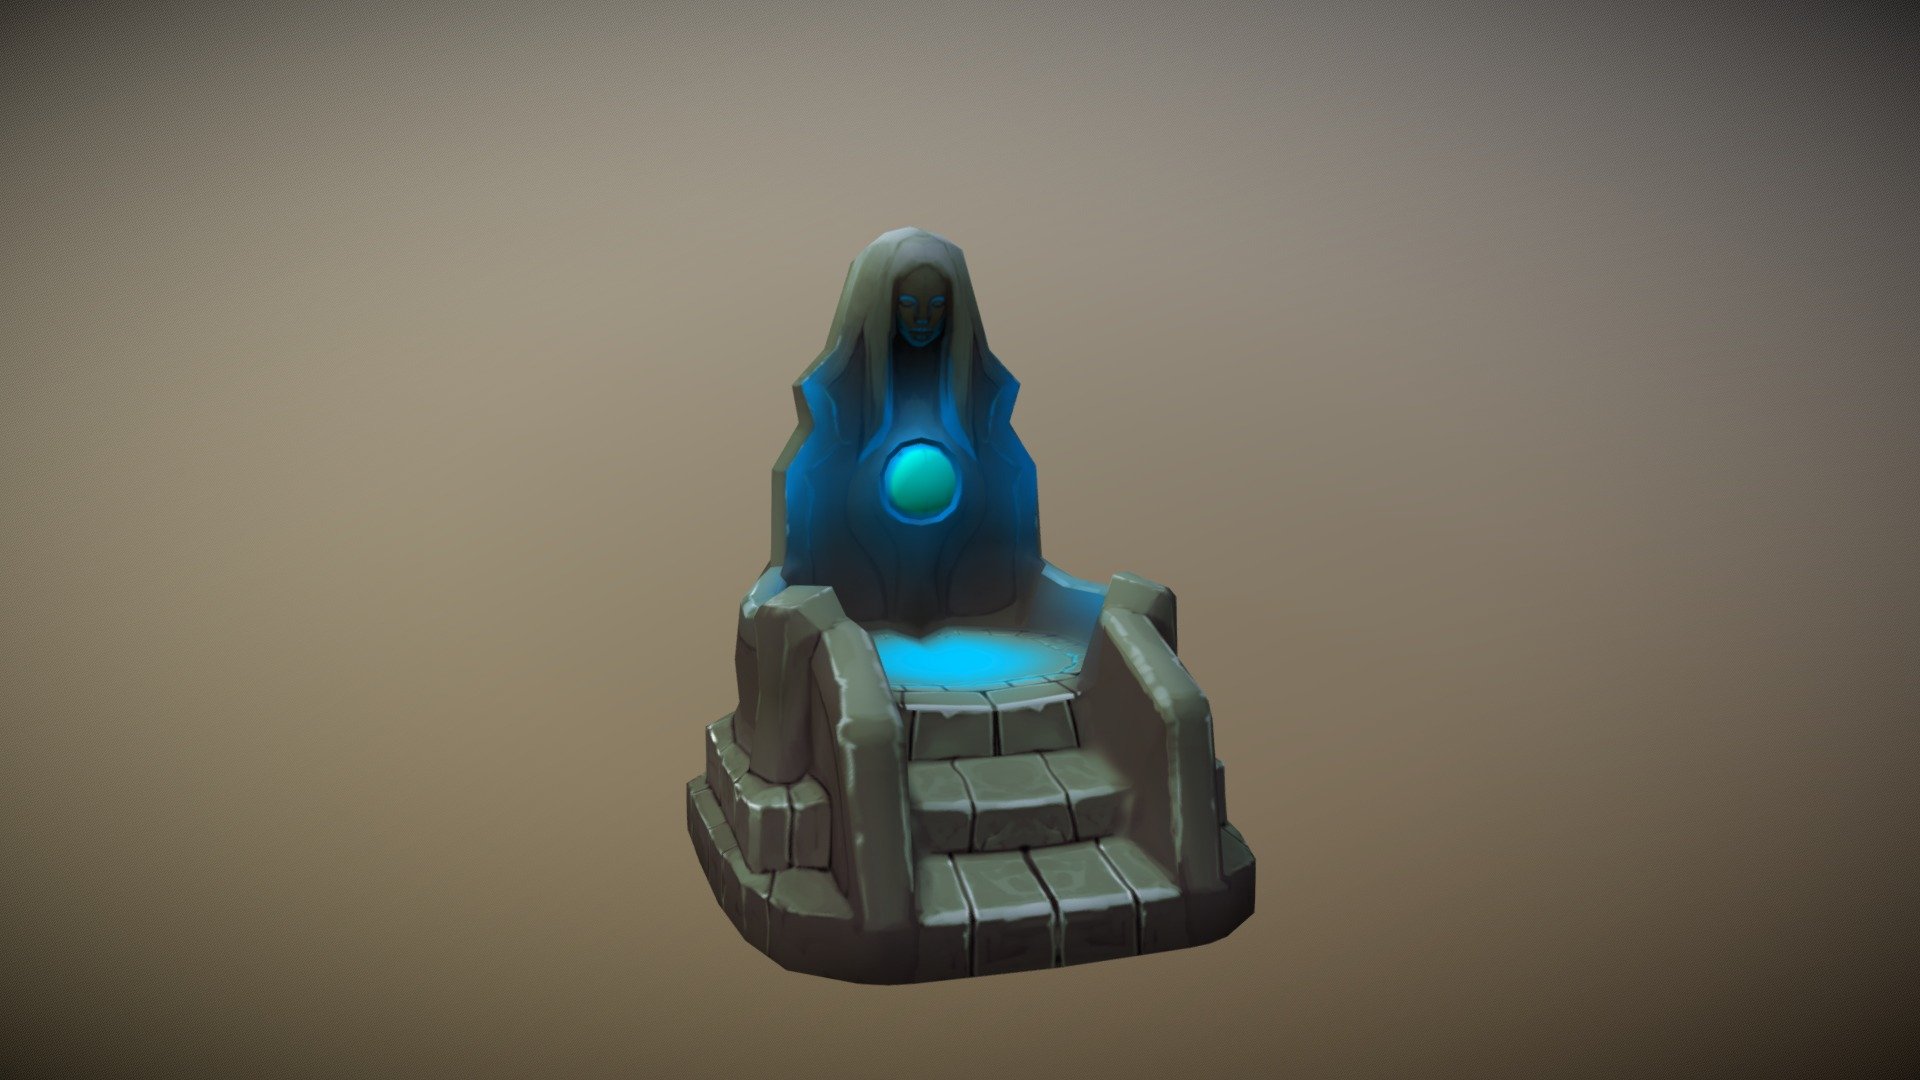 a test model
made by the incredibly talented Marco Vale
https://sketchfab.com/MarcoValeKaz - Altar Model - 3D model by chris.etches 3d model